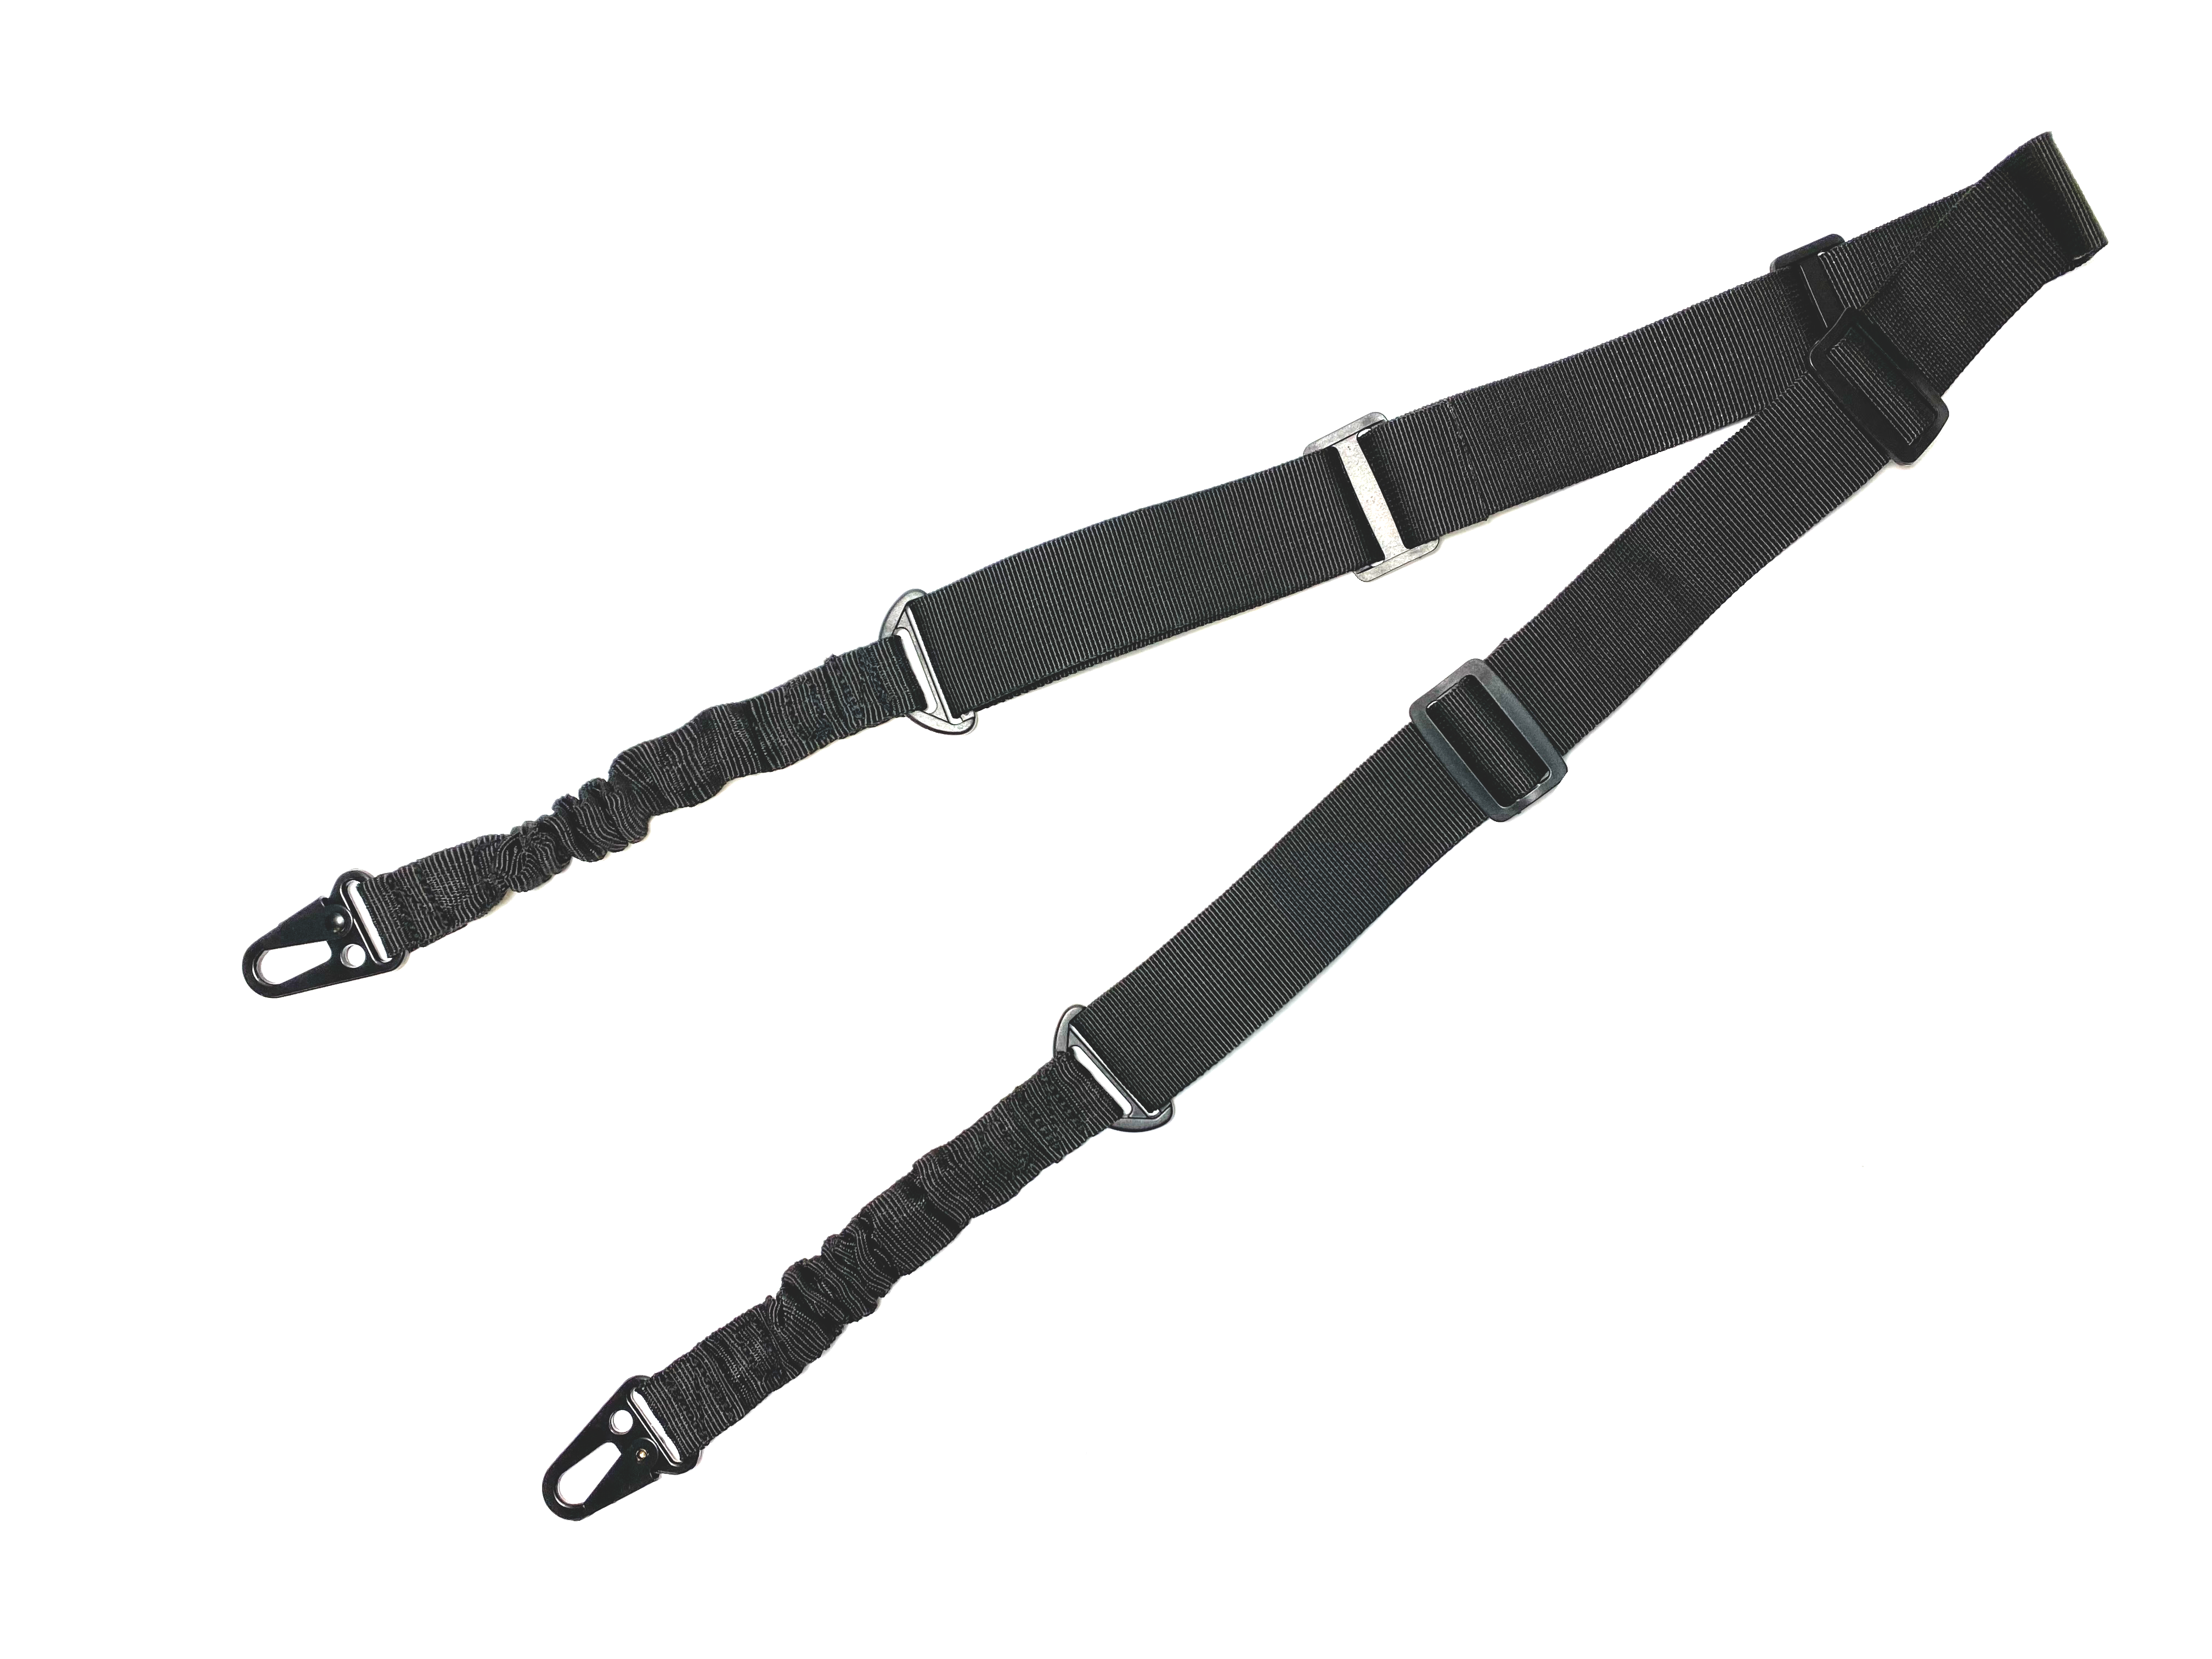 Single point QD Sling - Montreal Firearms Recreational Center